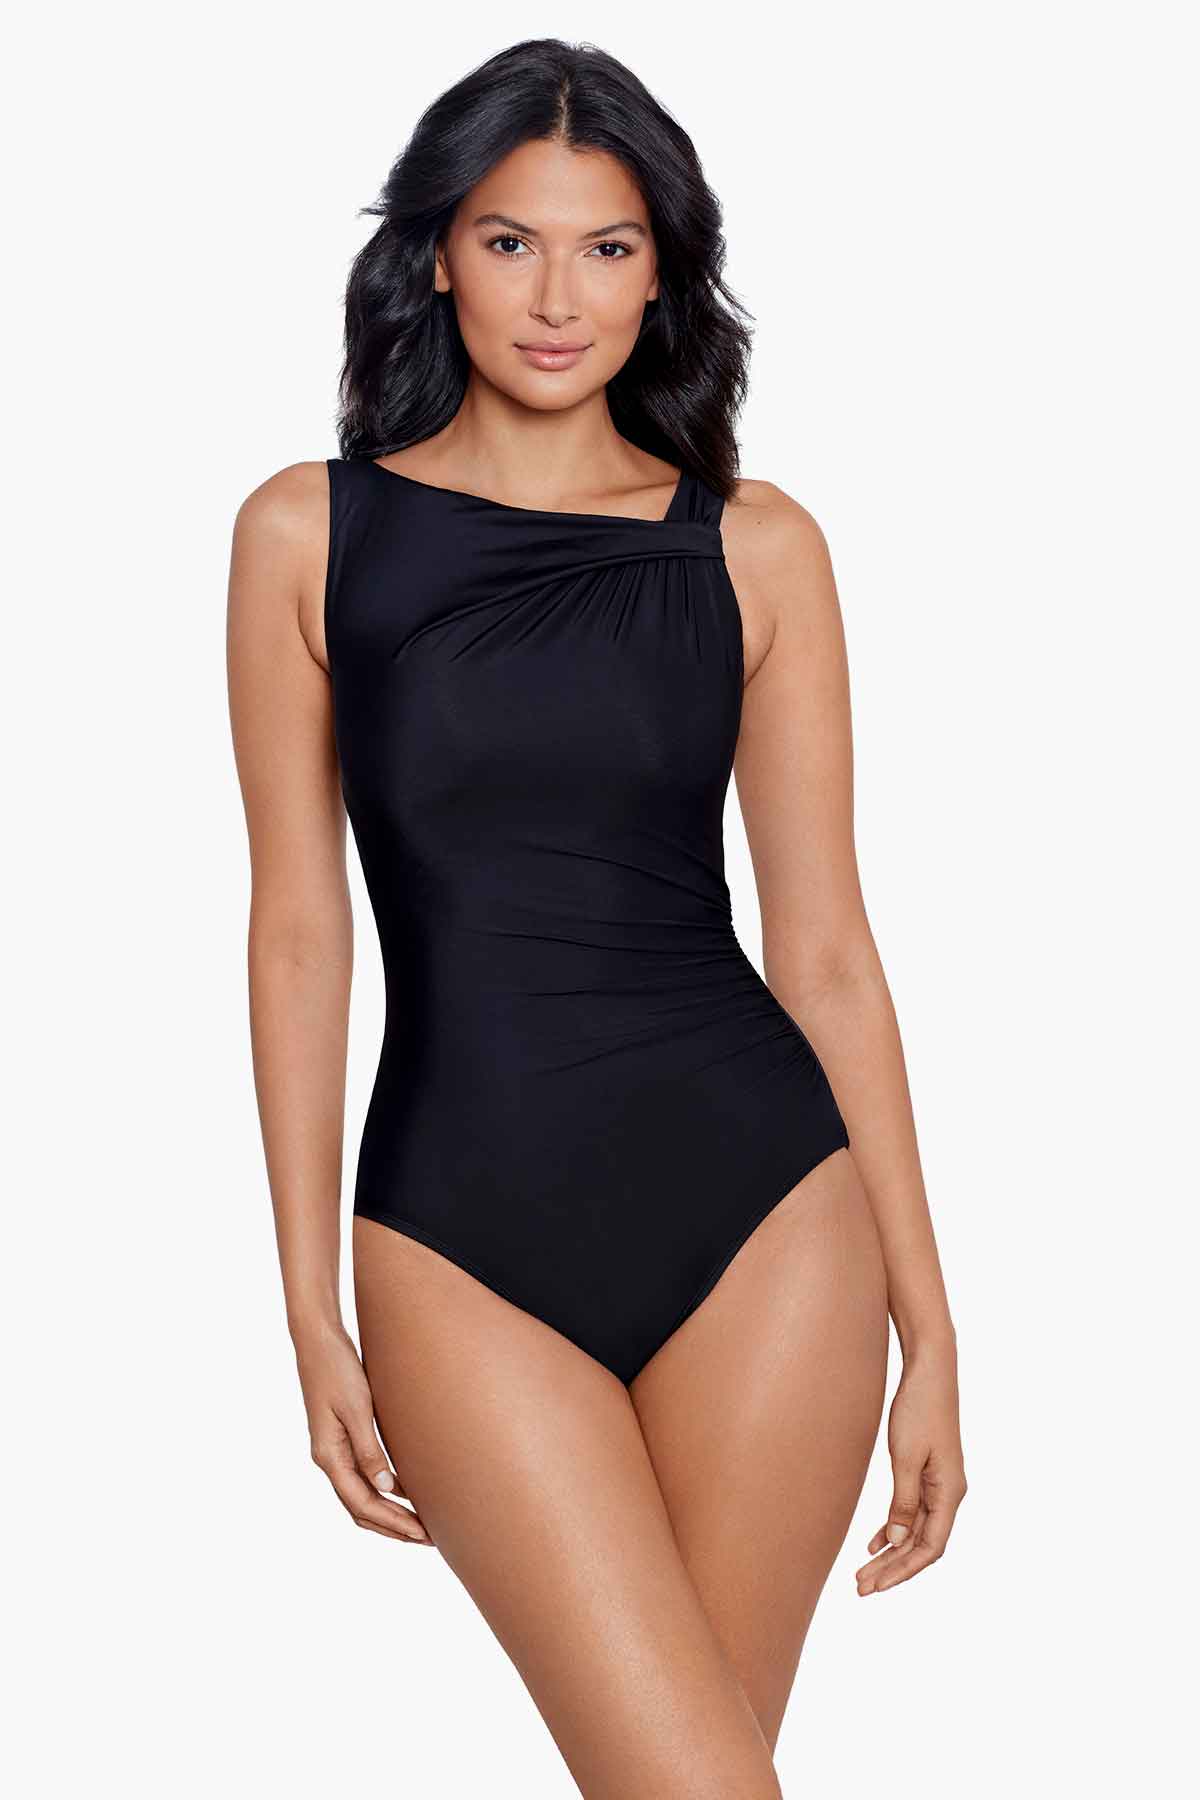 Five Unique Tummy Control Swim Bottoms That You Need to Try – Miraclesuit